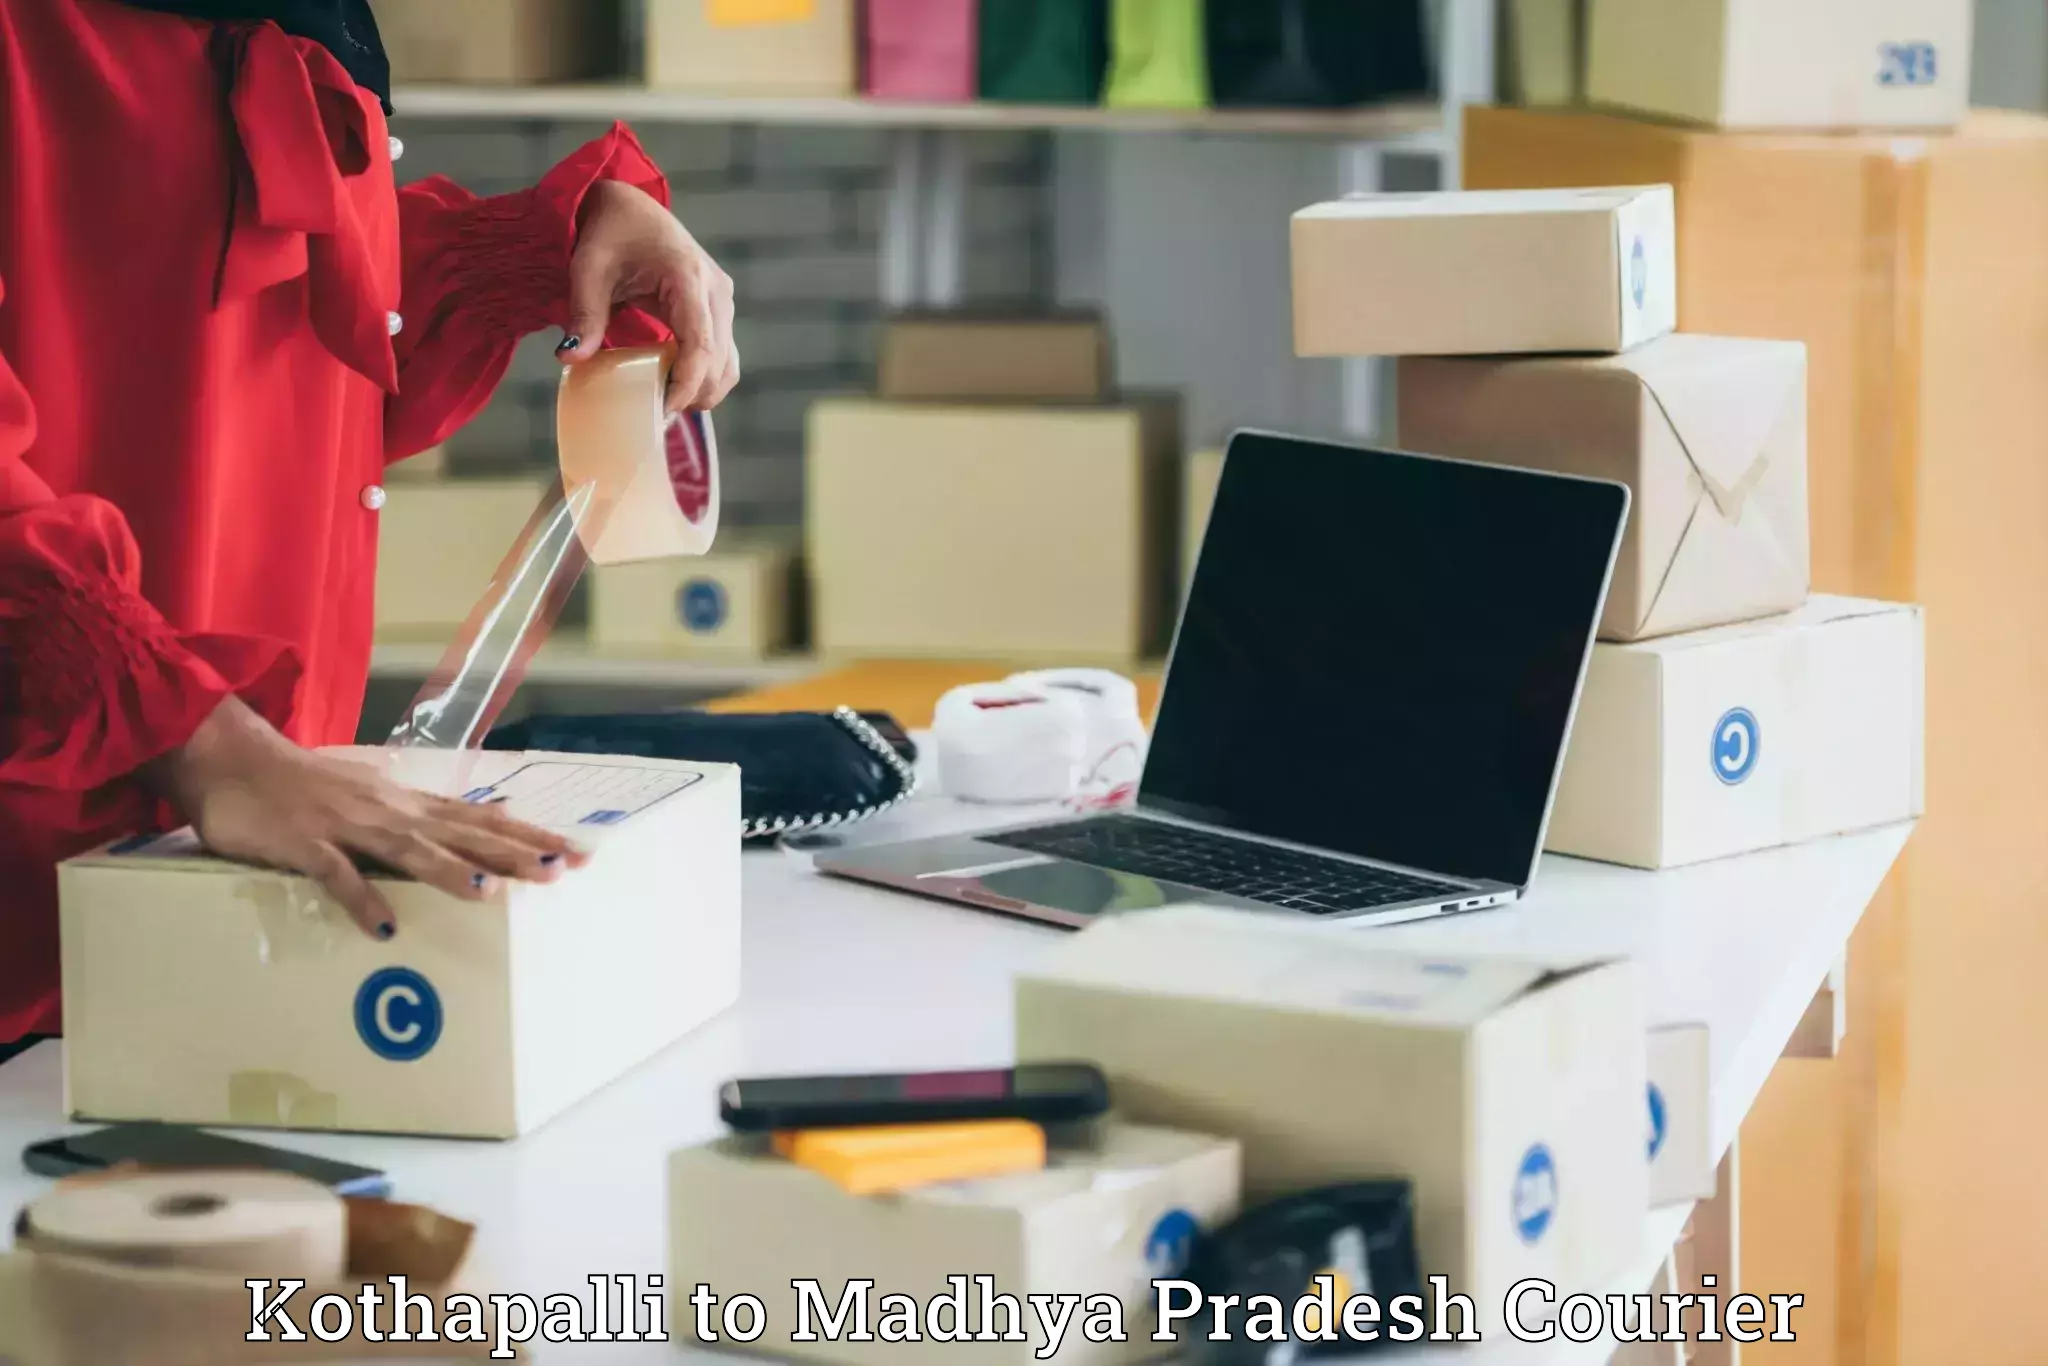 Courier dispatch services in Kothapalli to IIIT Bhopal